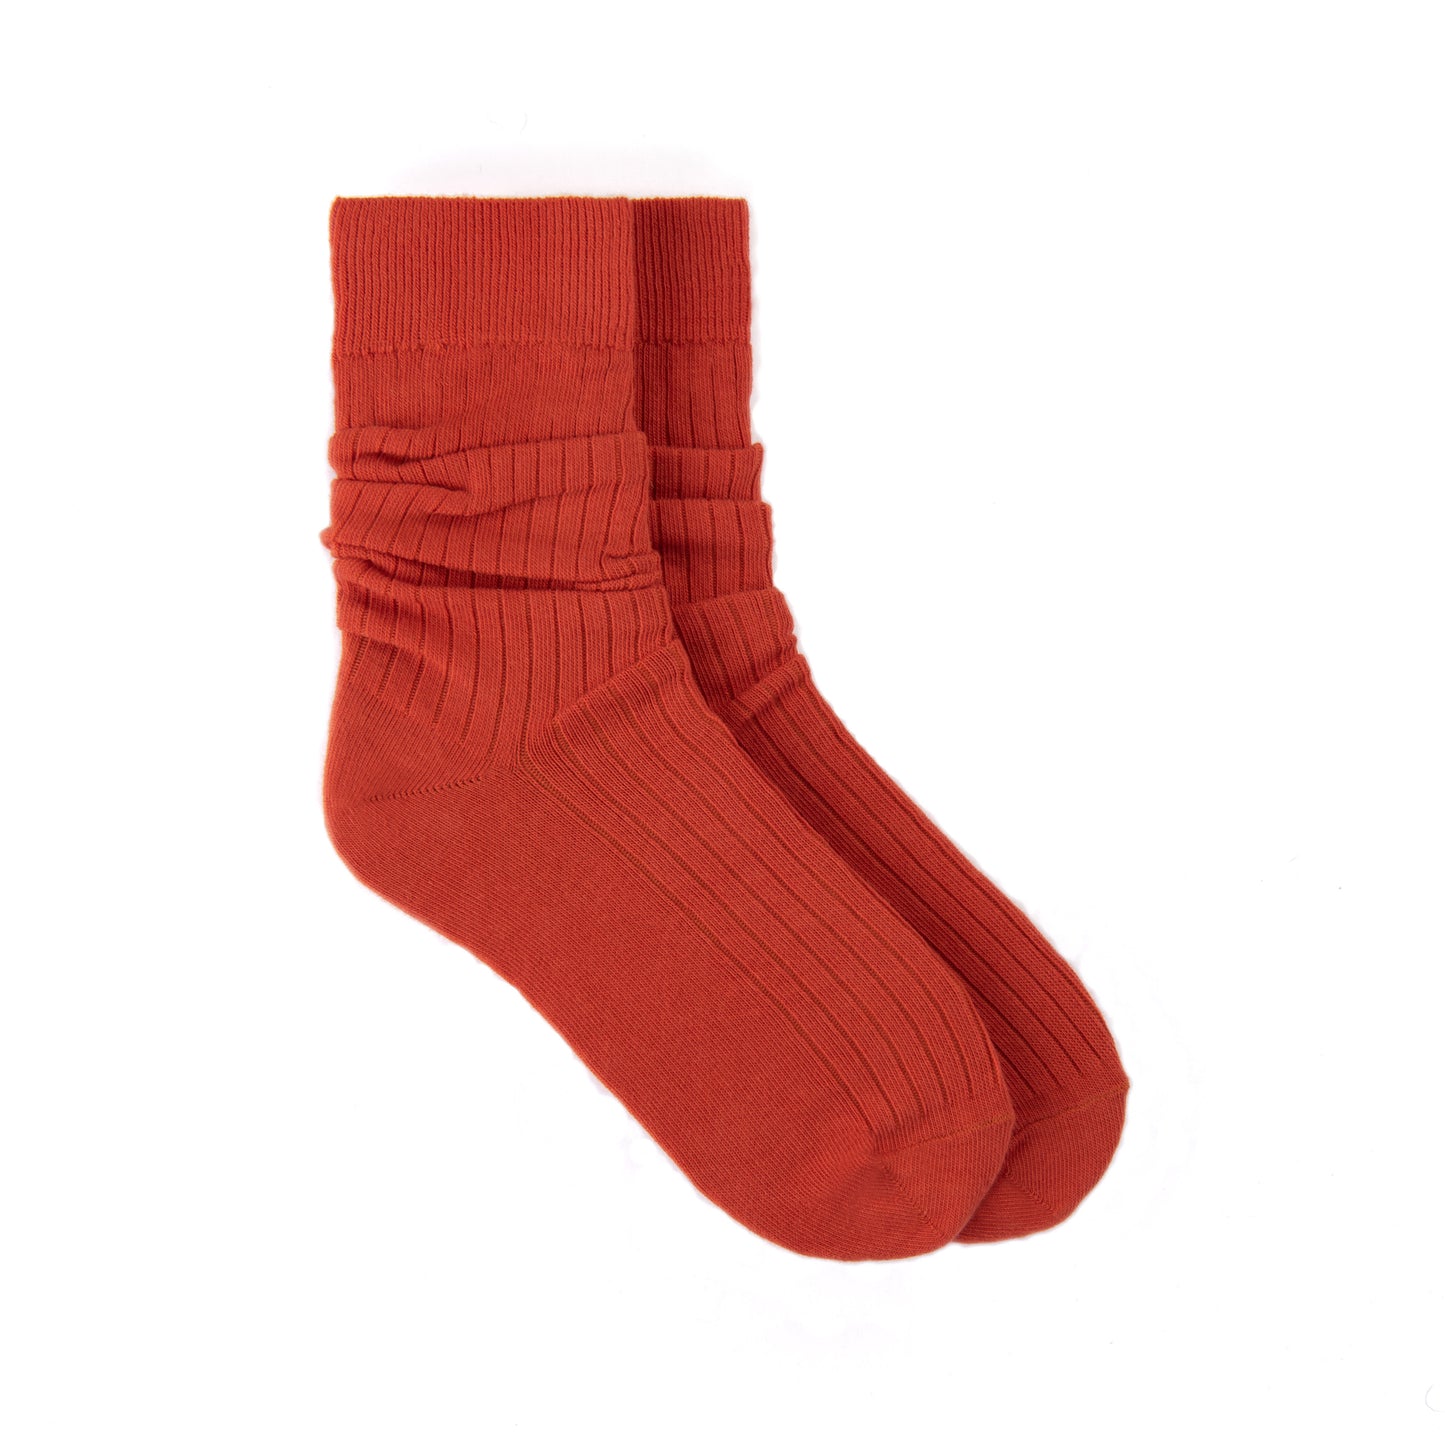 Ribbed Cotton Socks in Chili Red